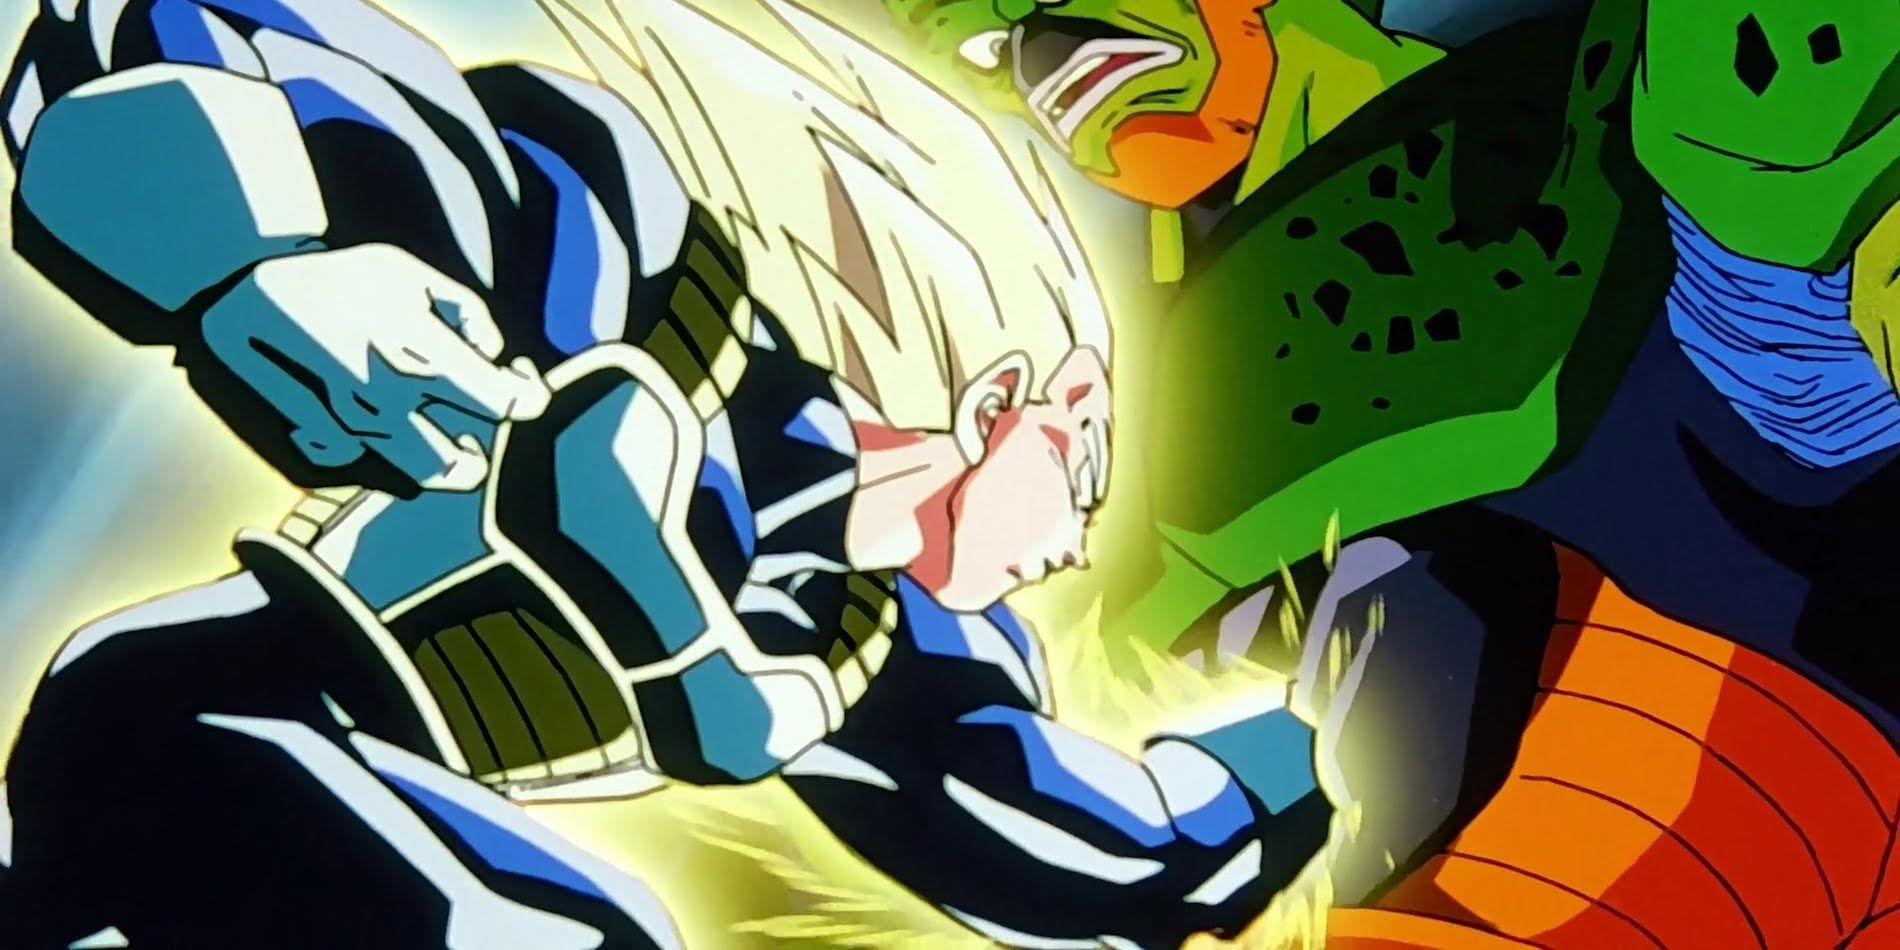 Vegeta's semi-perfect cell punch in Dragon Ball